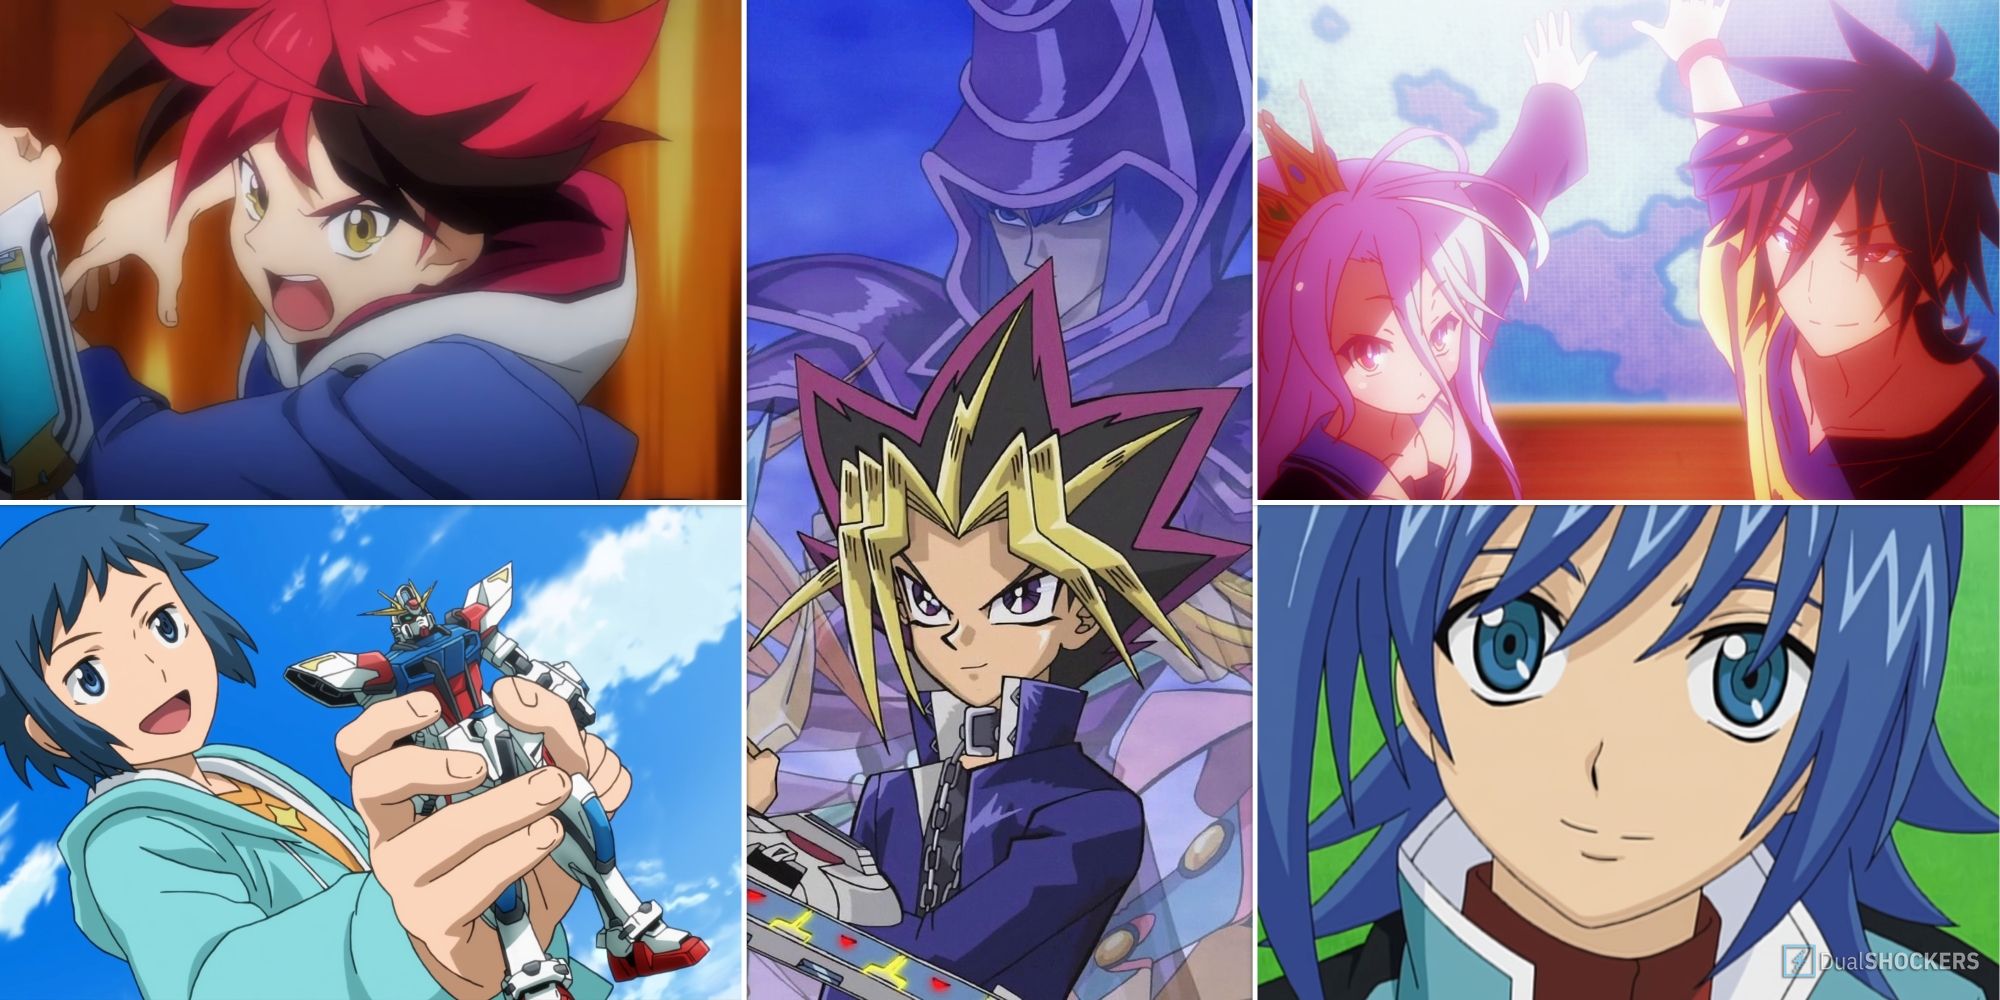 A Guide To The 'Yu-Gi-Oh!' Series In Order